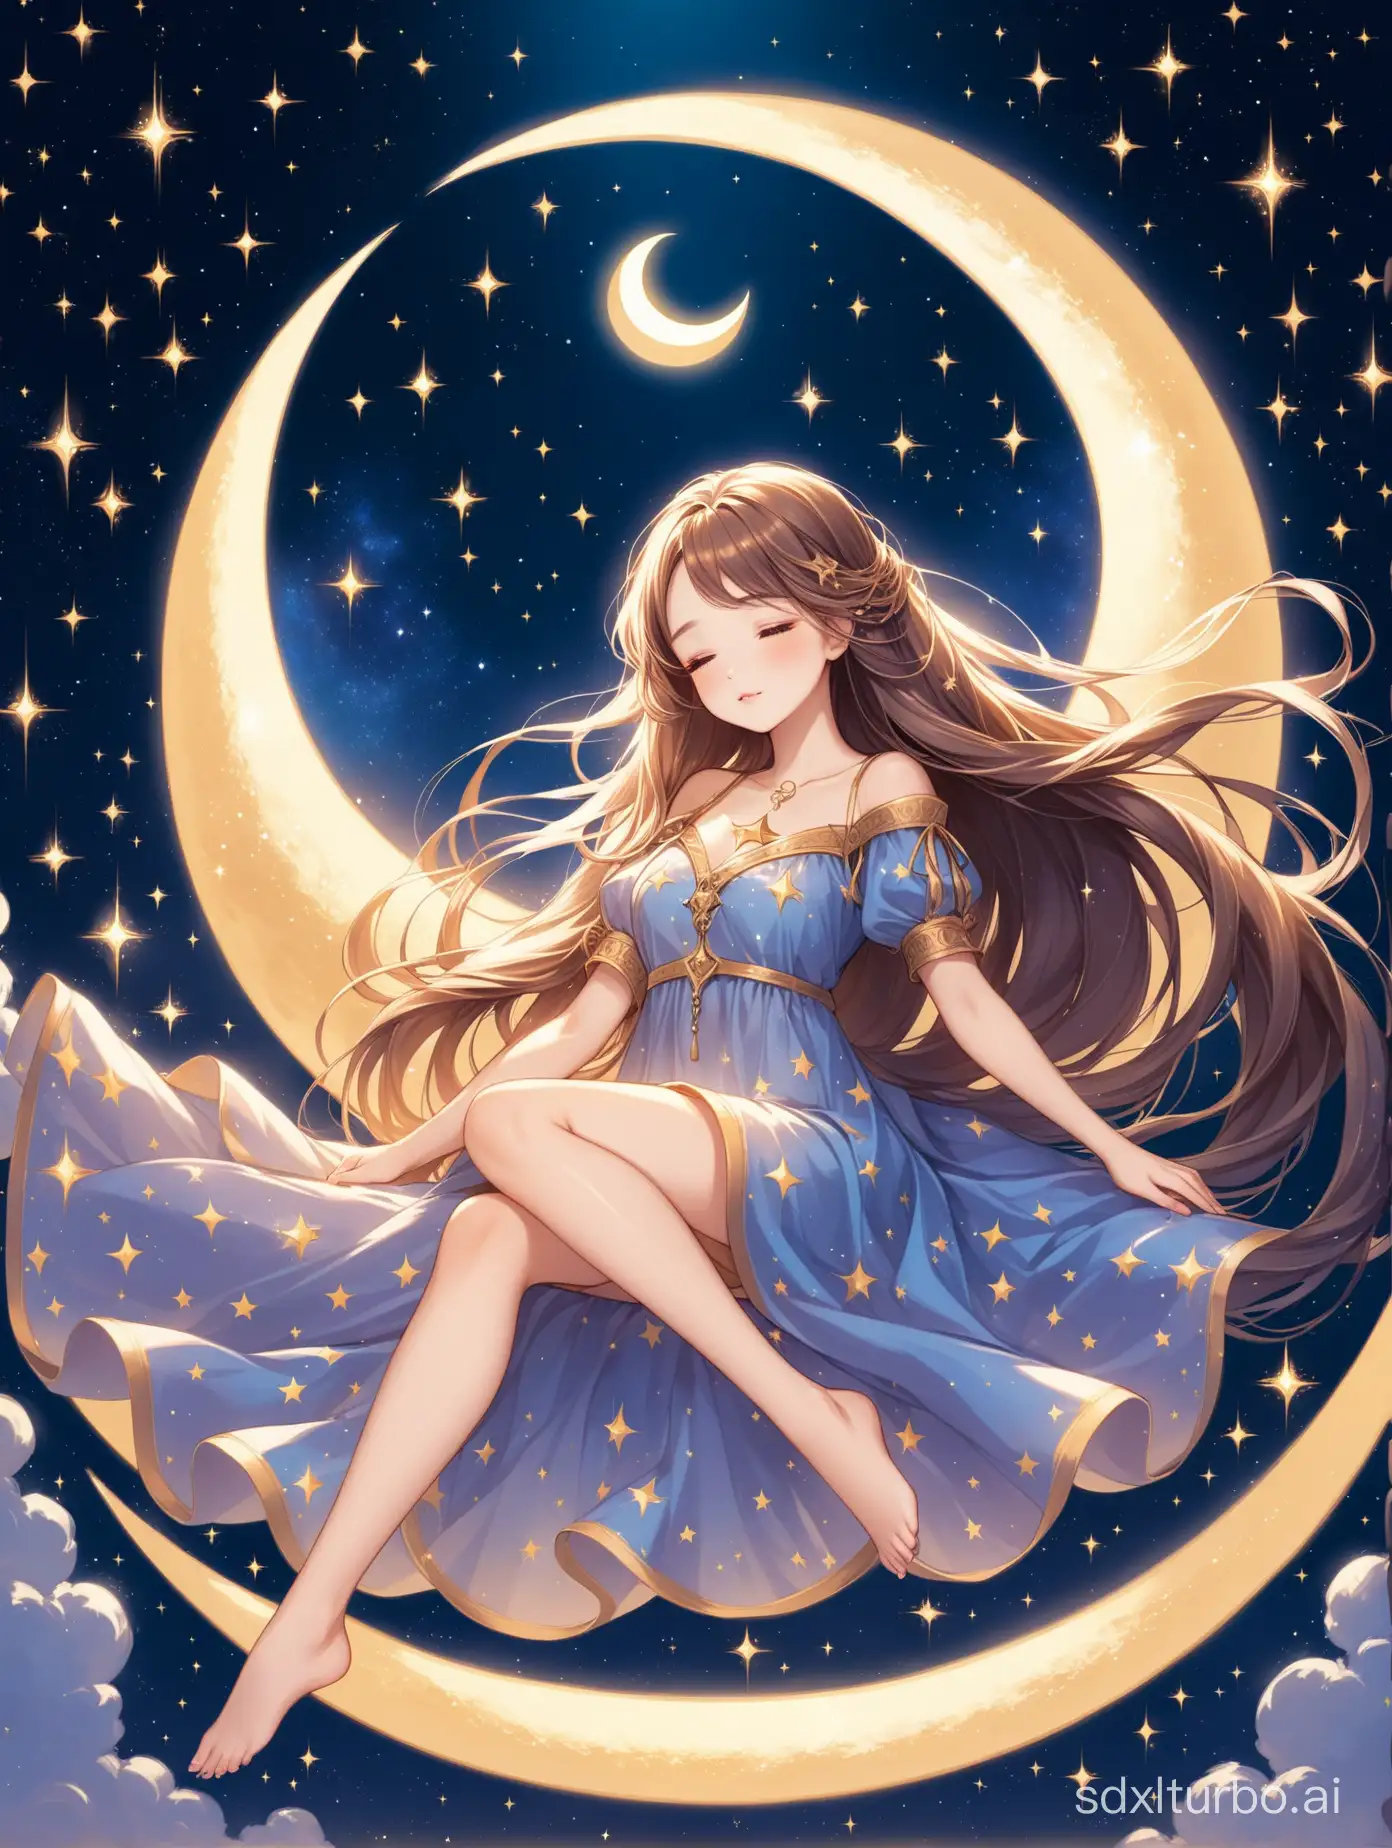 beautiful girl with long hair laying in the crest of the crescent moon